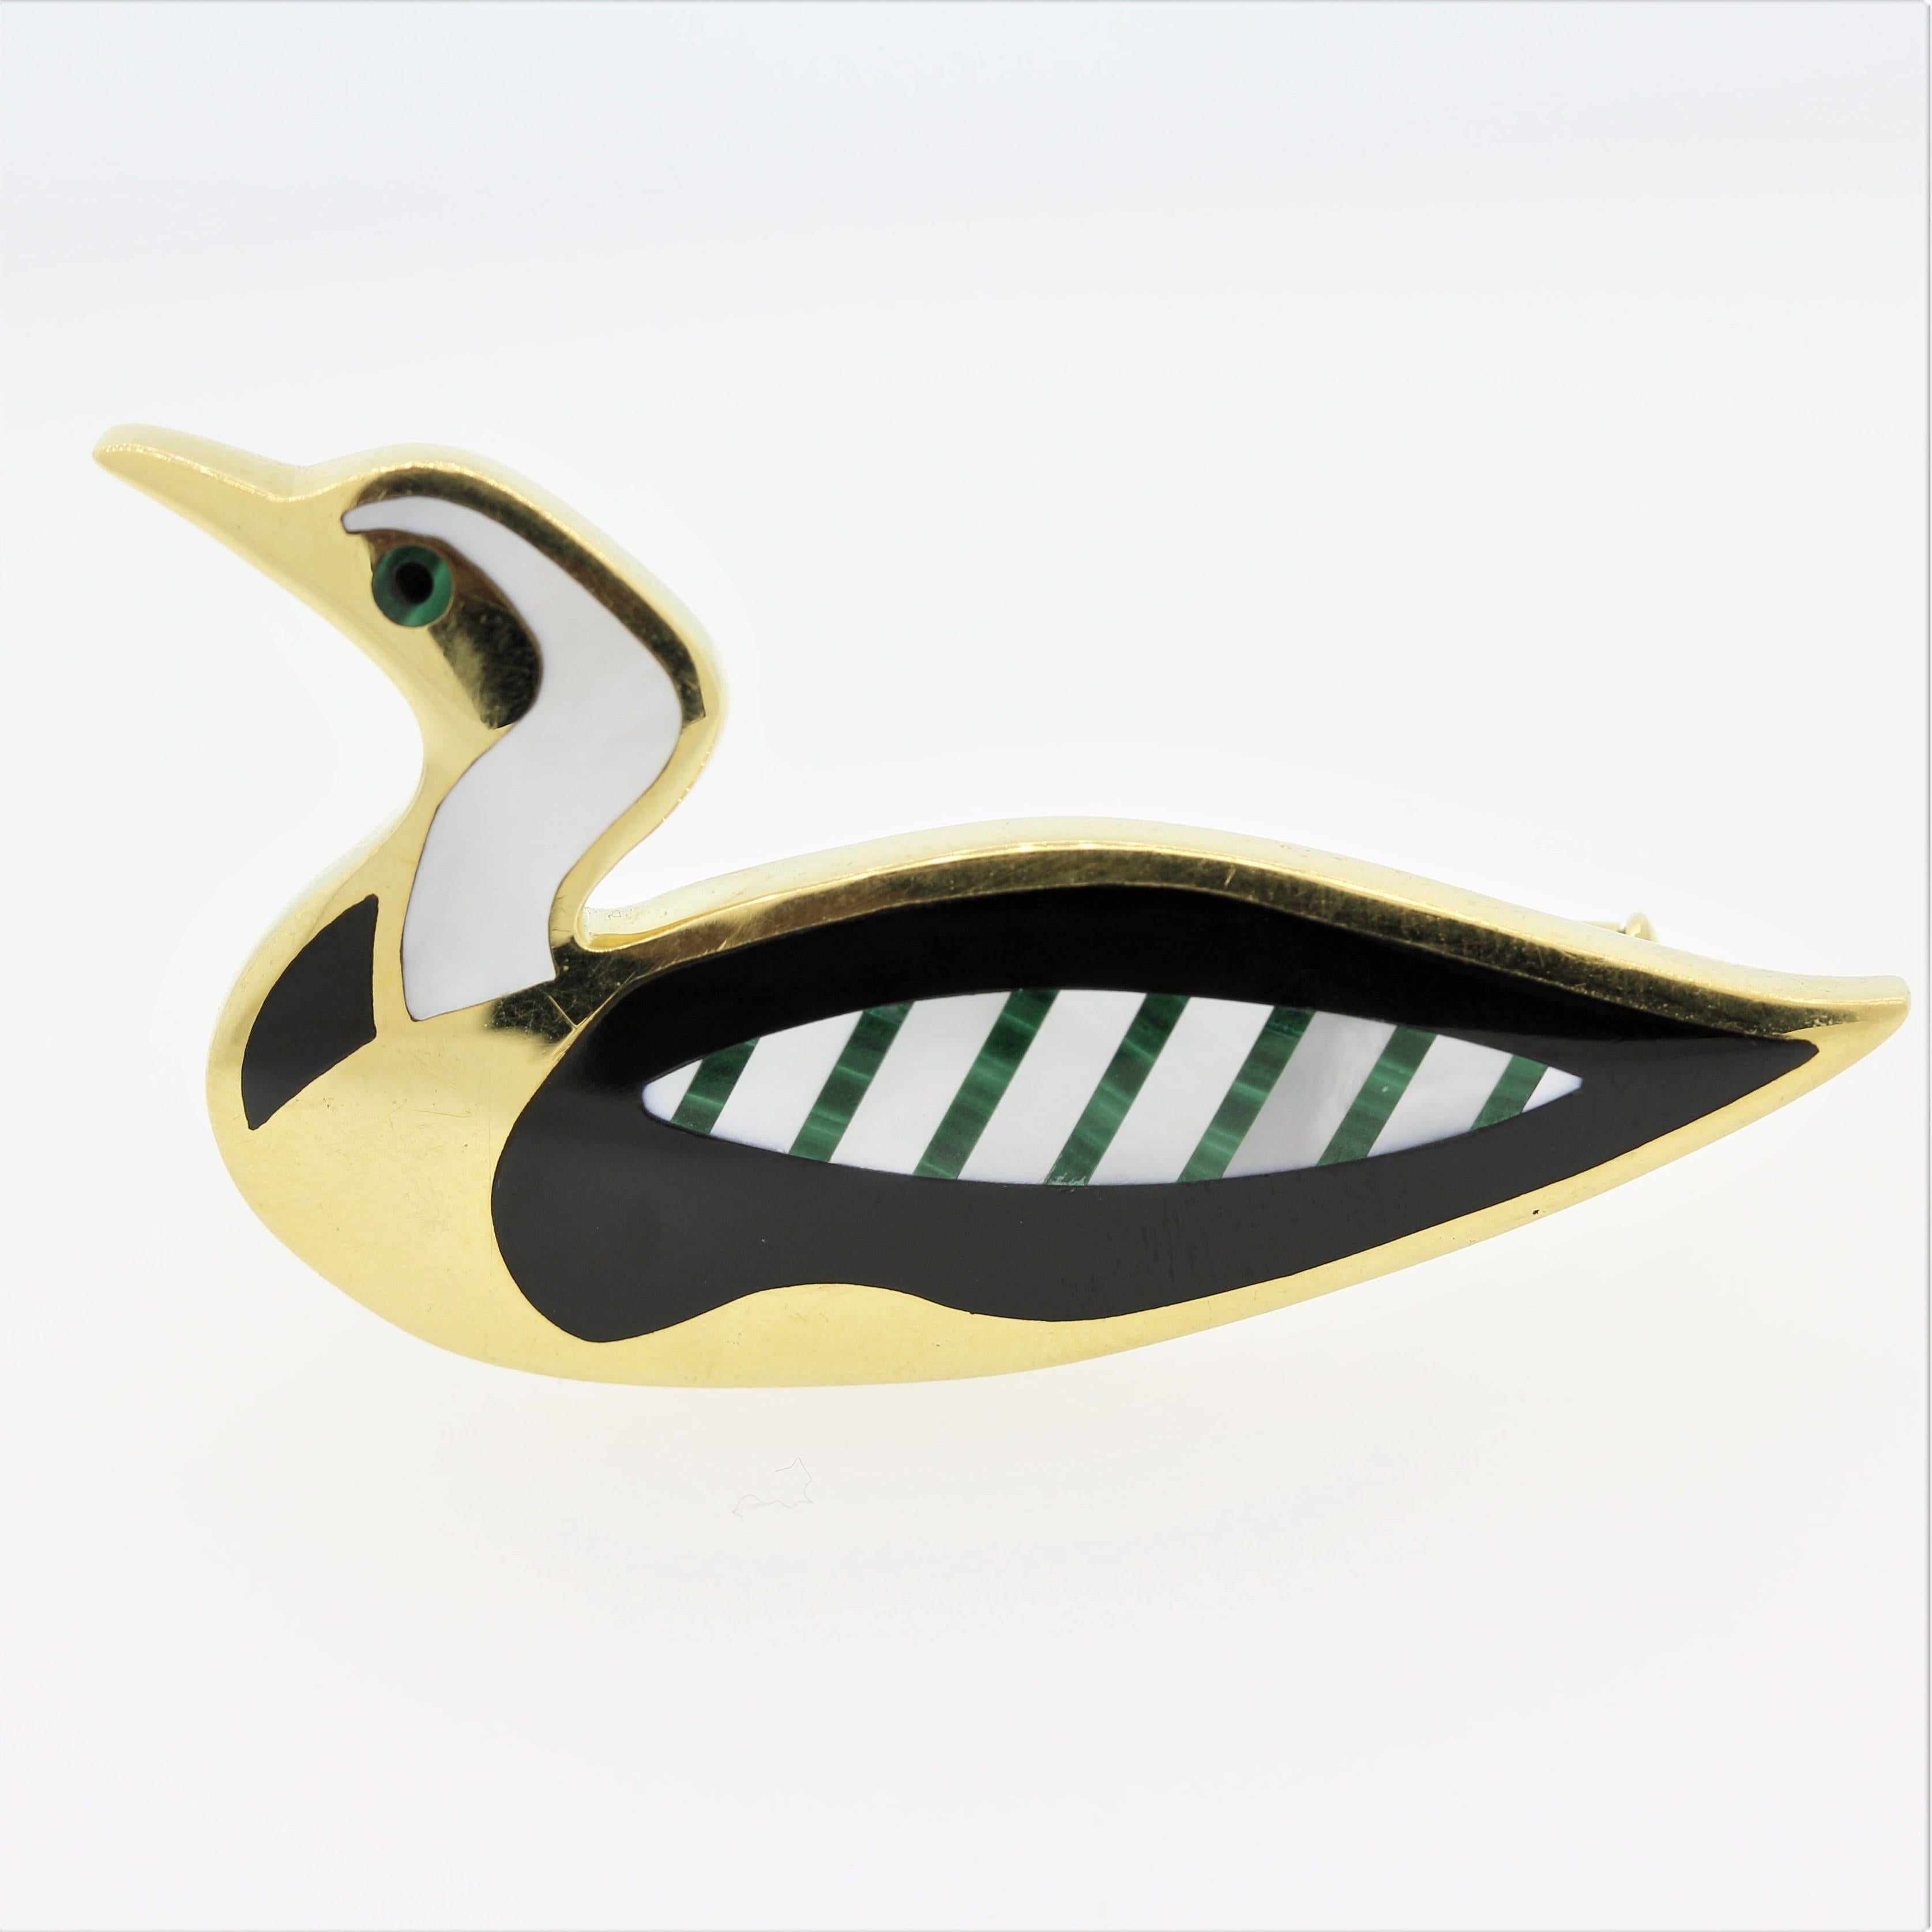 An original piece by Tiffany & Co, this duck pin features fine inlaid stones. They include mother of pearl which make up the duck’s neck and wing, black onyx marking its chest and side and green malachite that strips its wing and eye. A sweet and